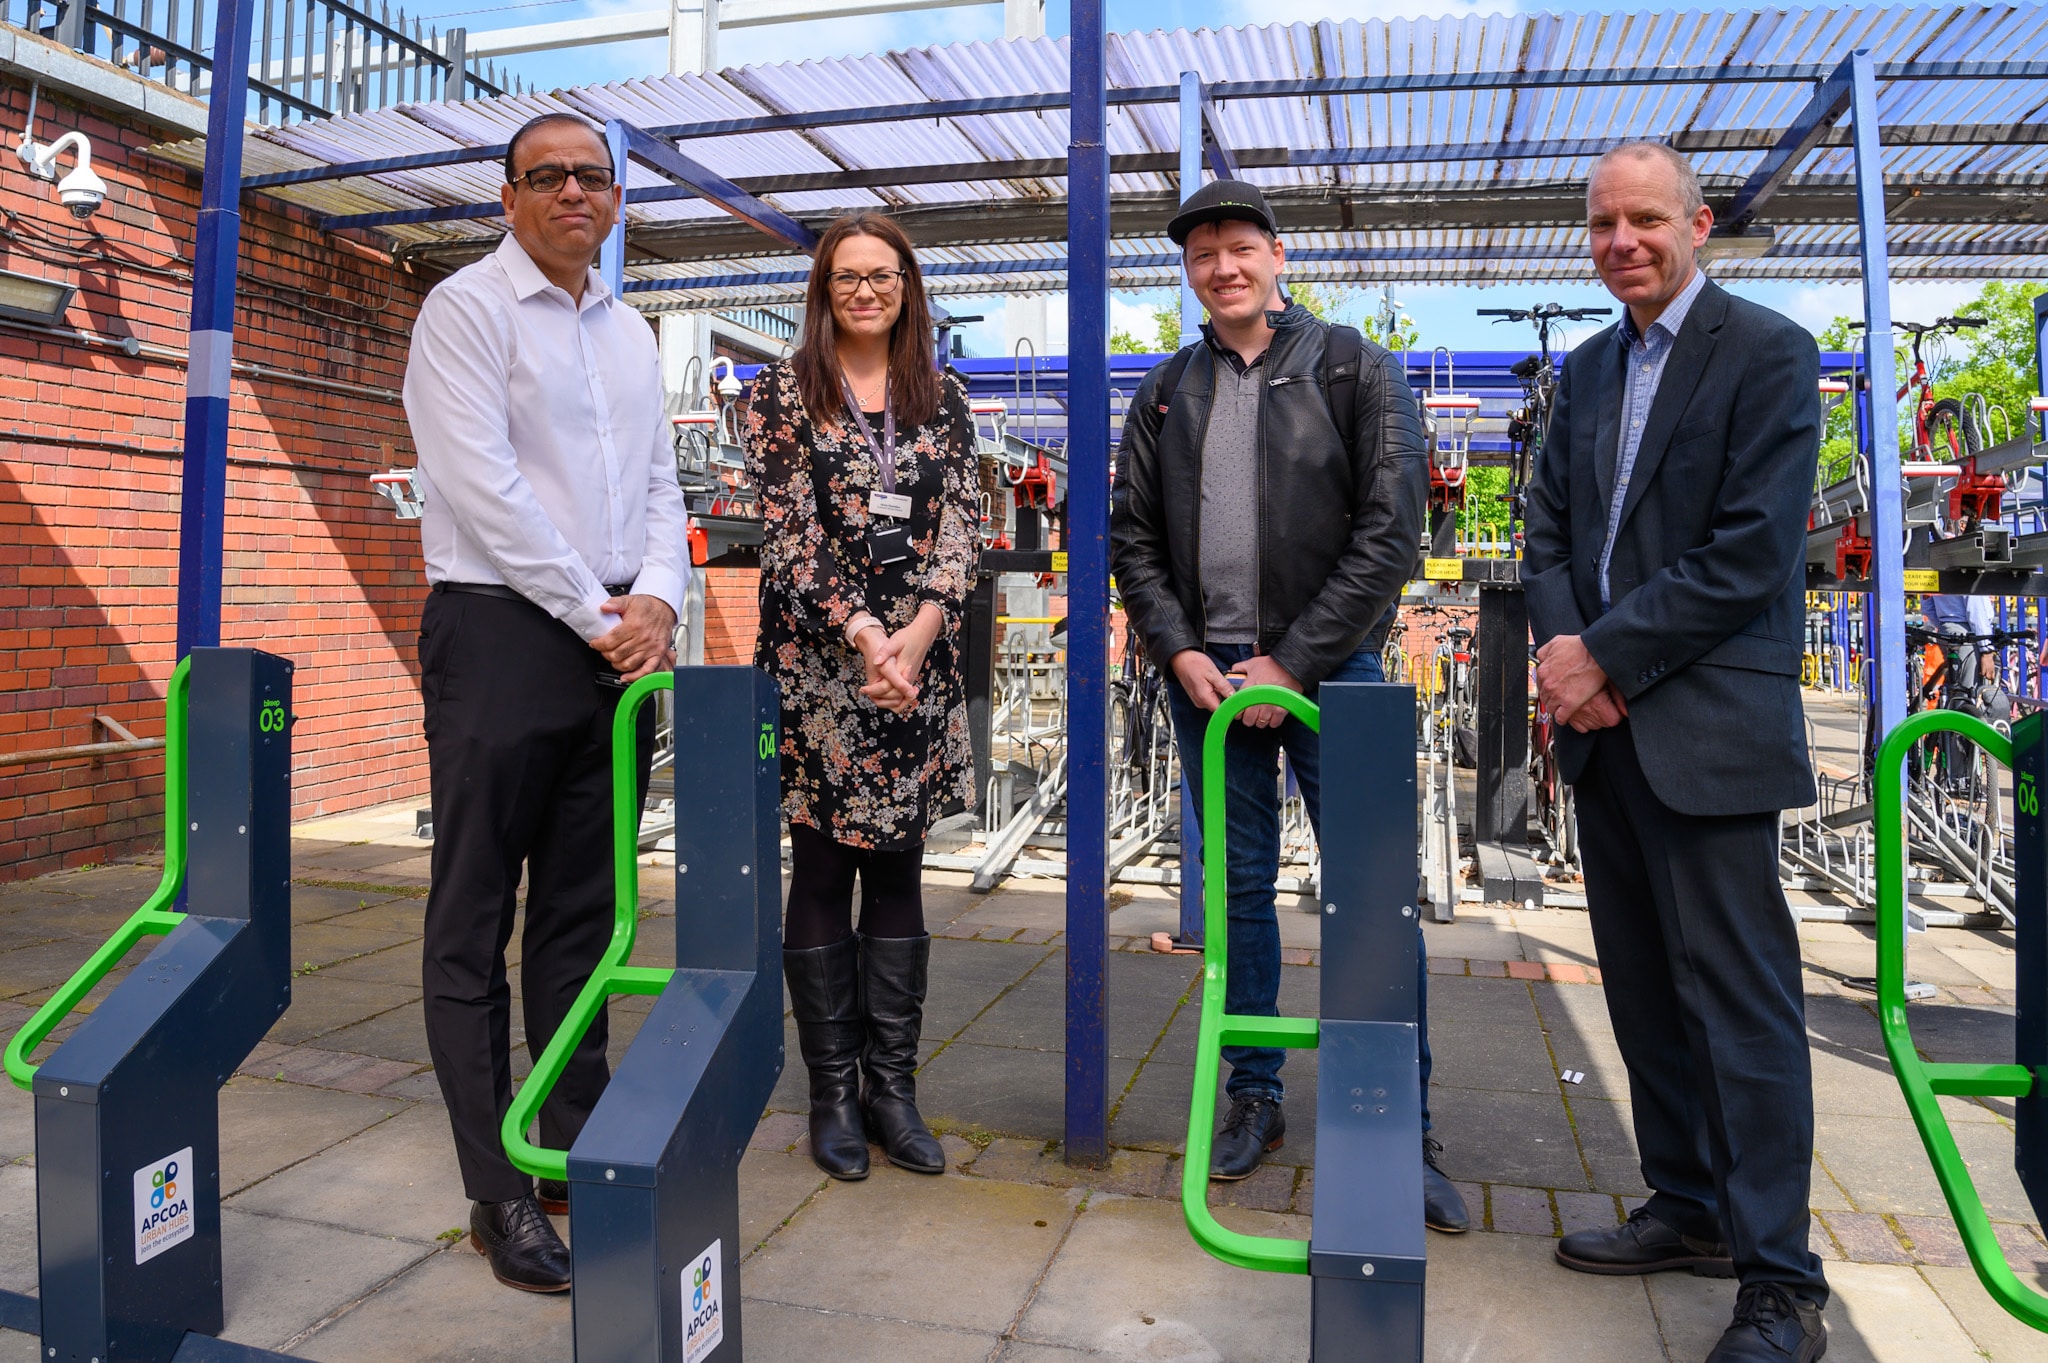 Bikeep stations are now available at Bedford parking hub